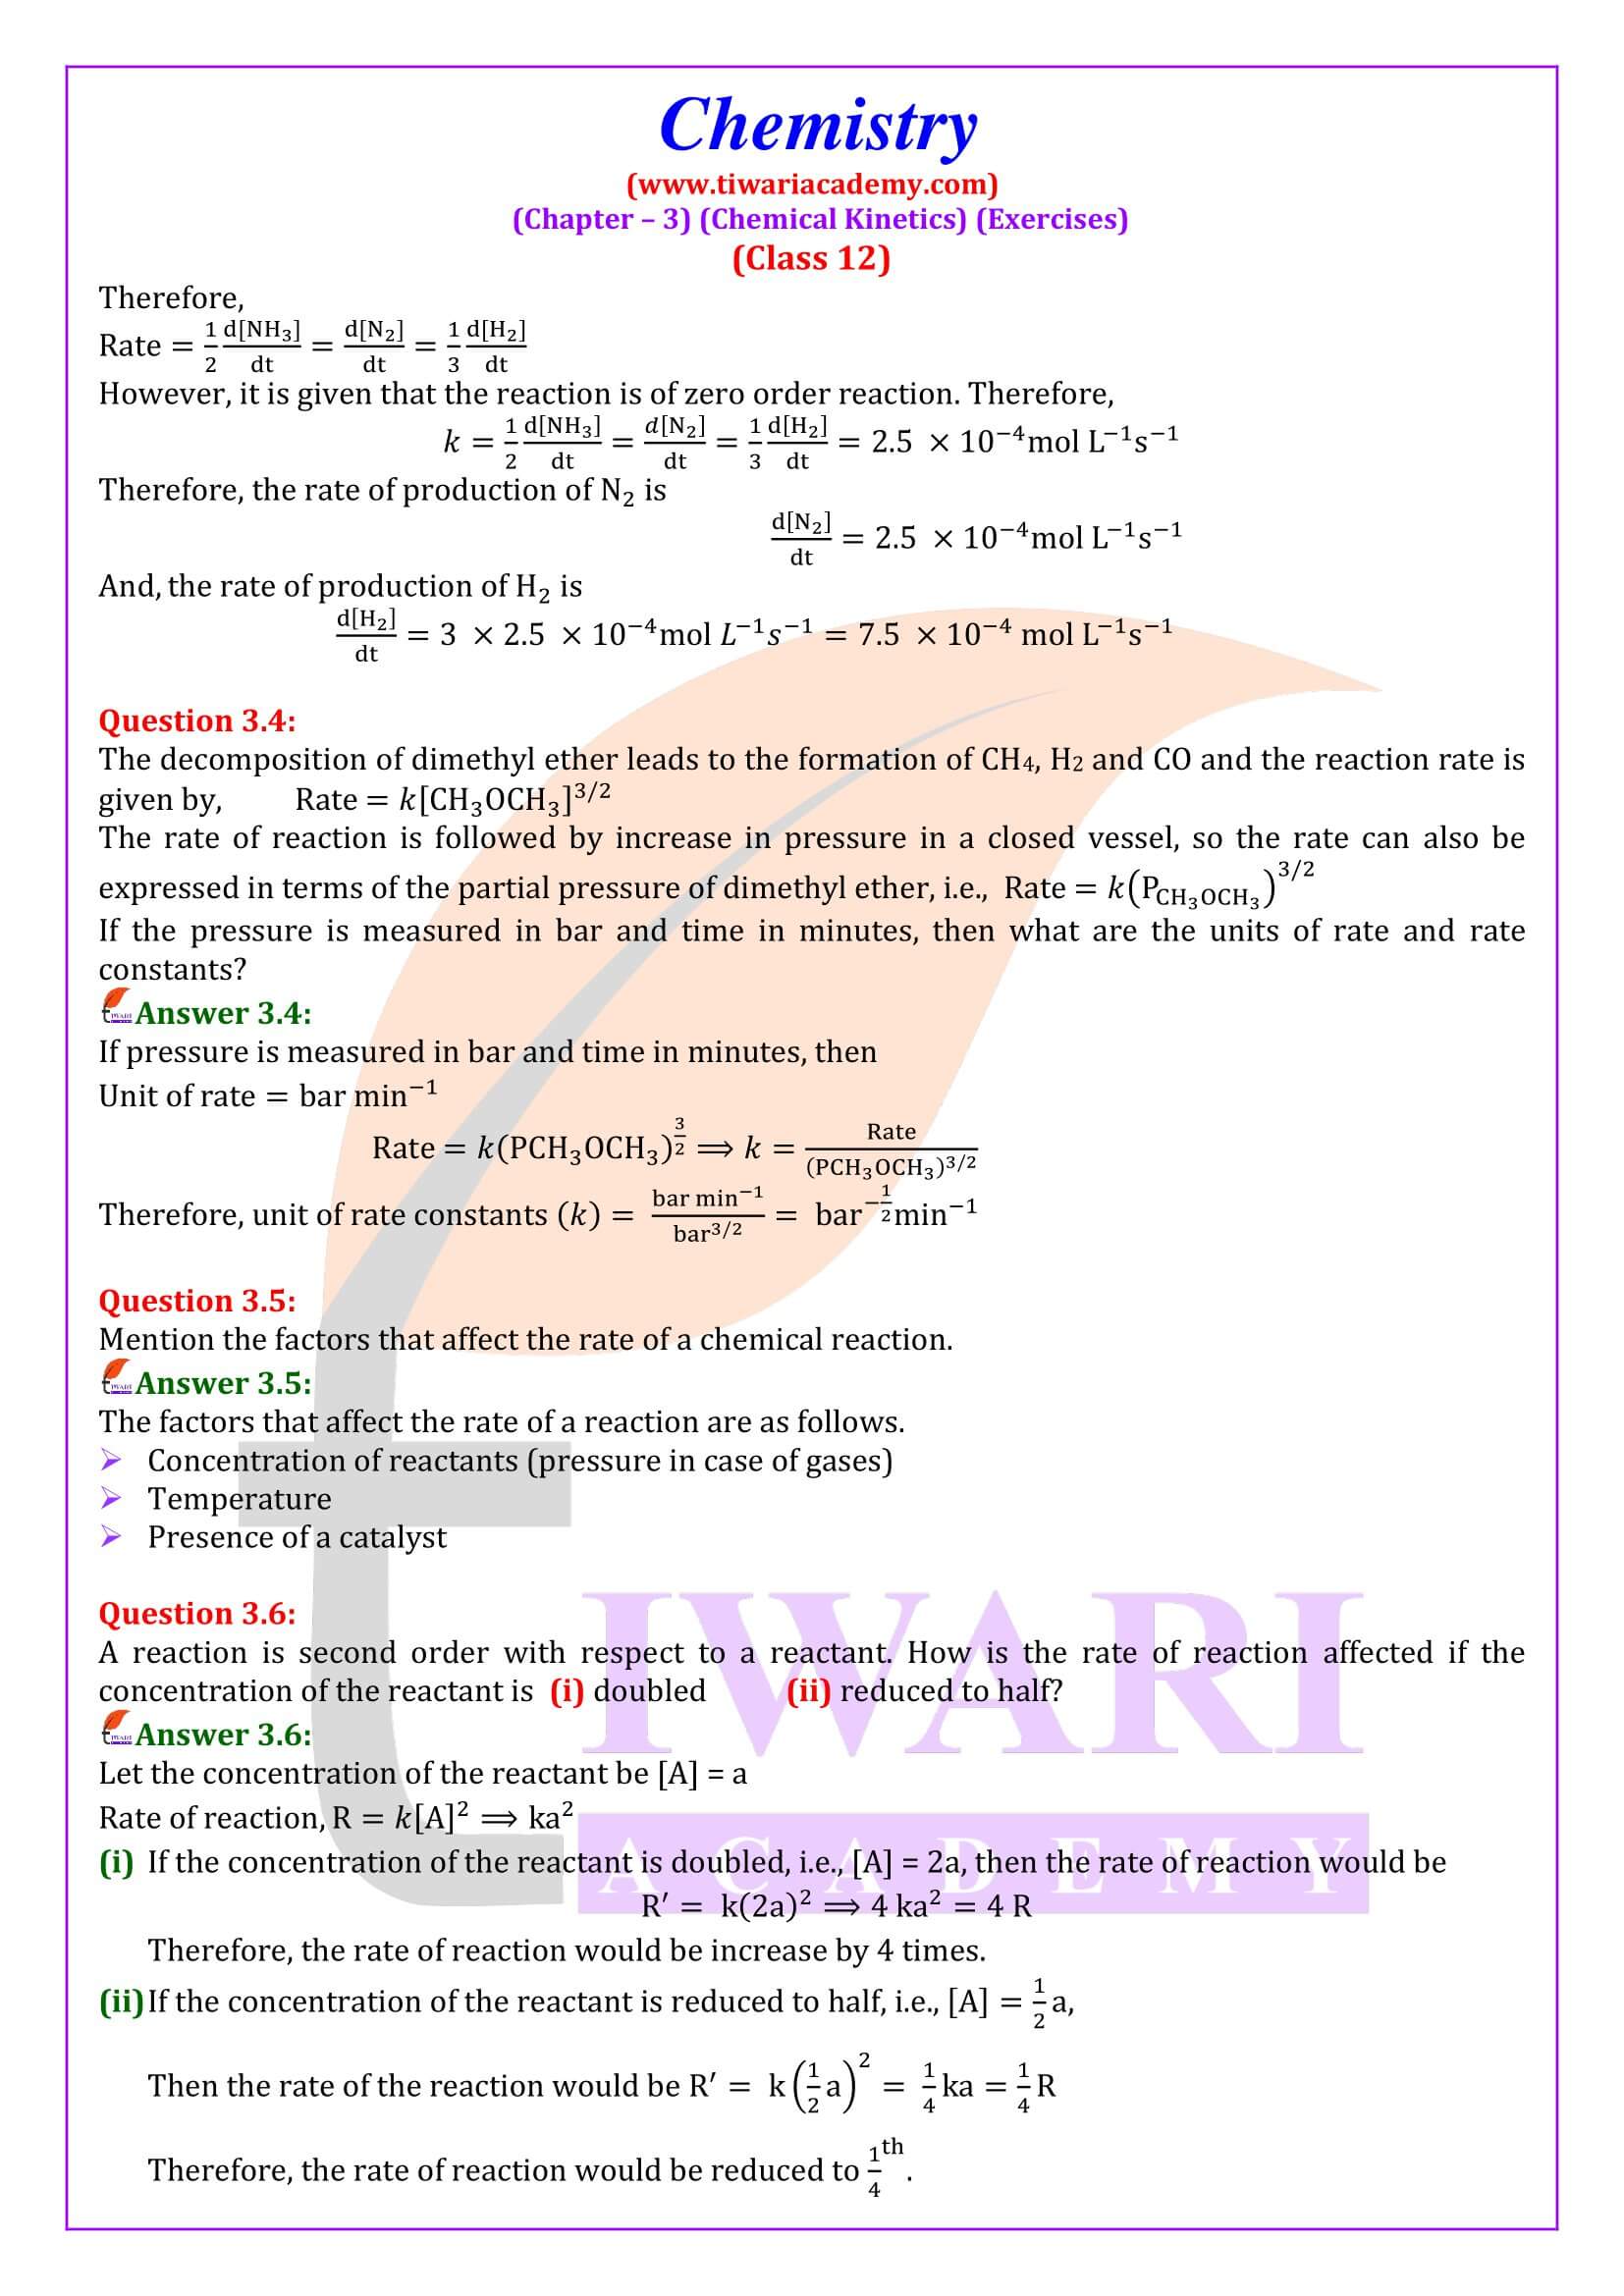 NCERT Solutions for Class 12 Chemistry Chapter 3 Chemical Kinetics